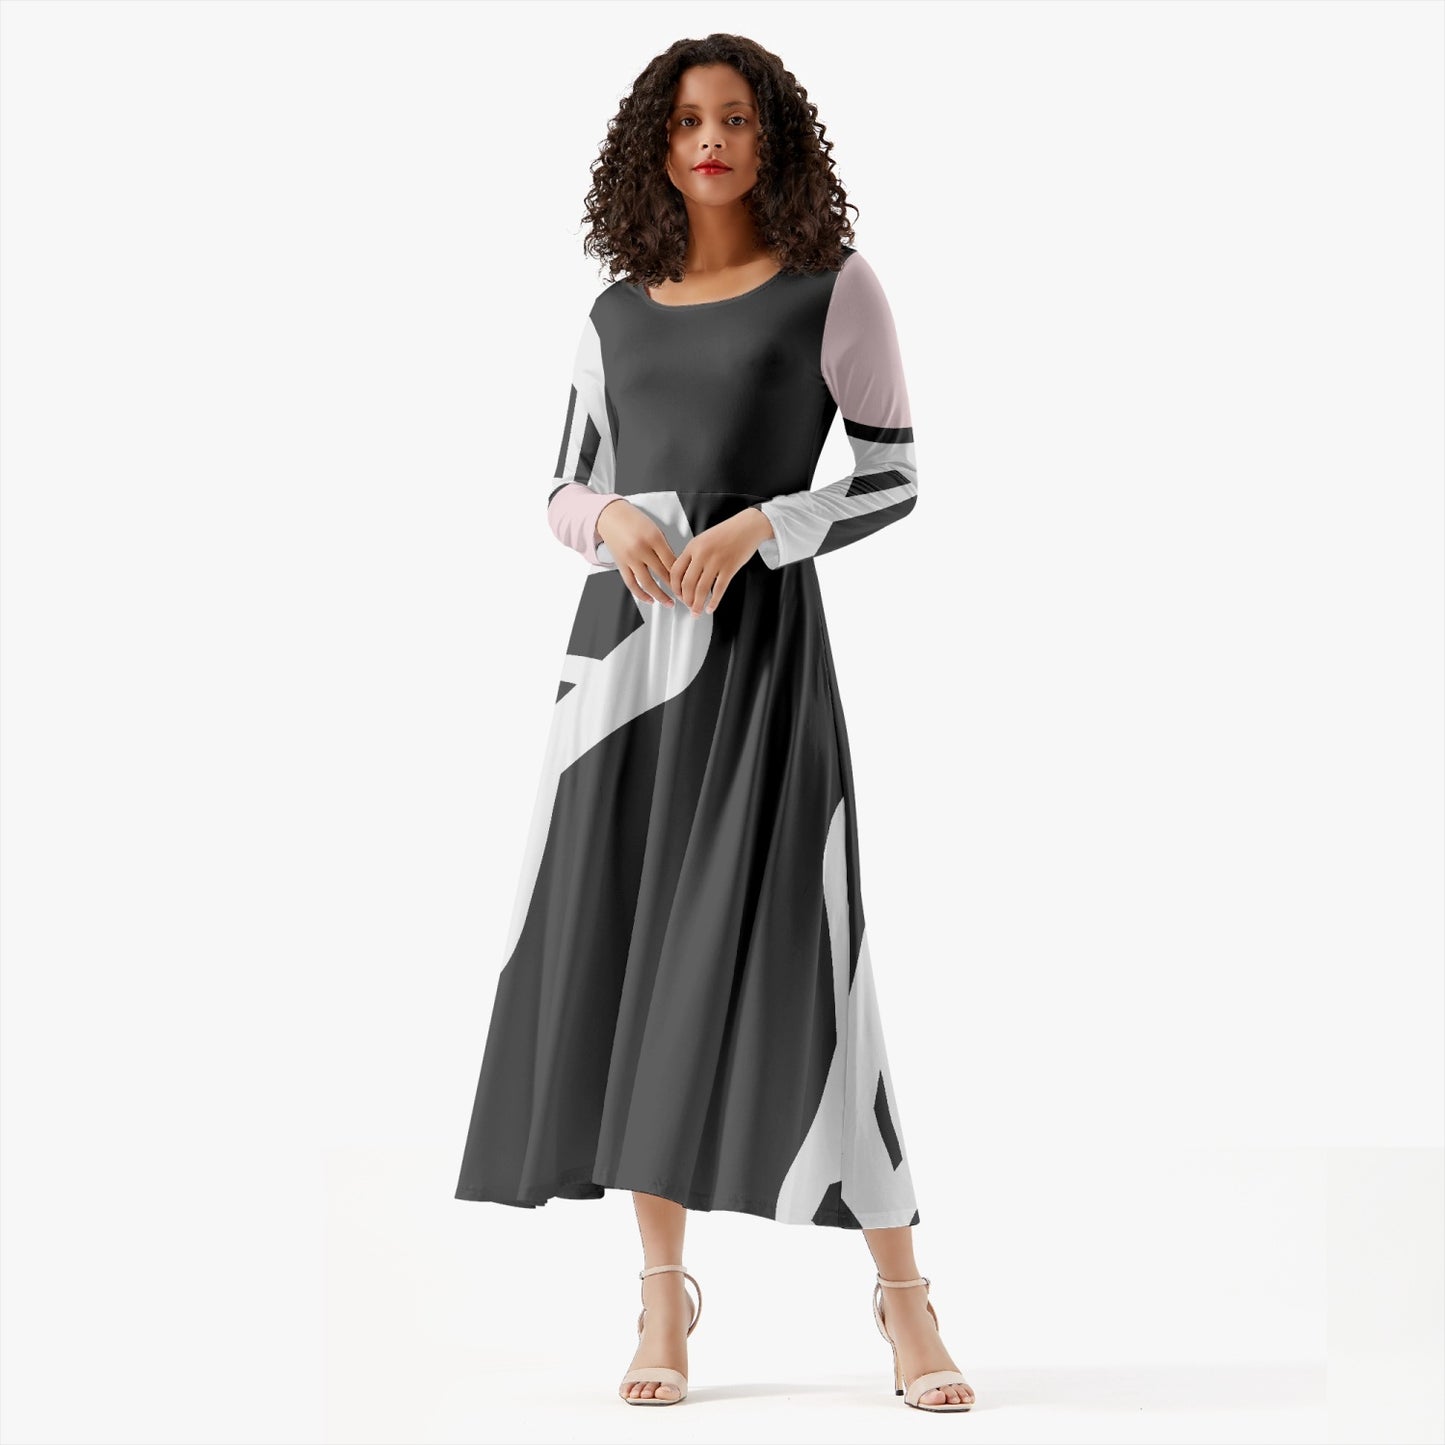 Long-Sleeve One-piece Dress, Black, White, Pink, Gifts for her